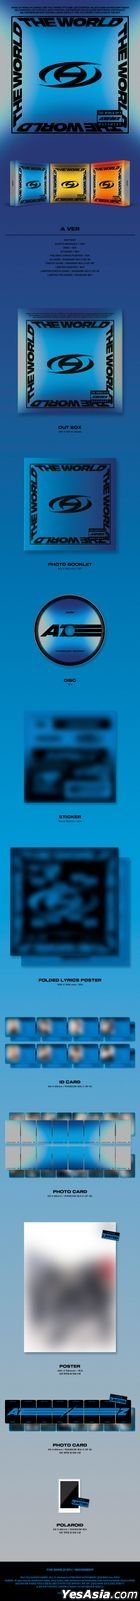 ATEEZ - THE WORLD EP.1 : MOVEMENT (A Version) + Poster in Tube (A Version)